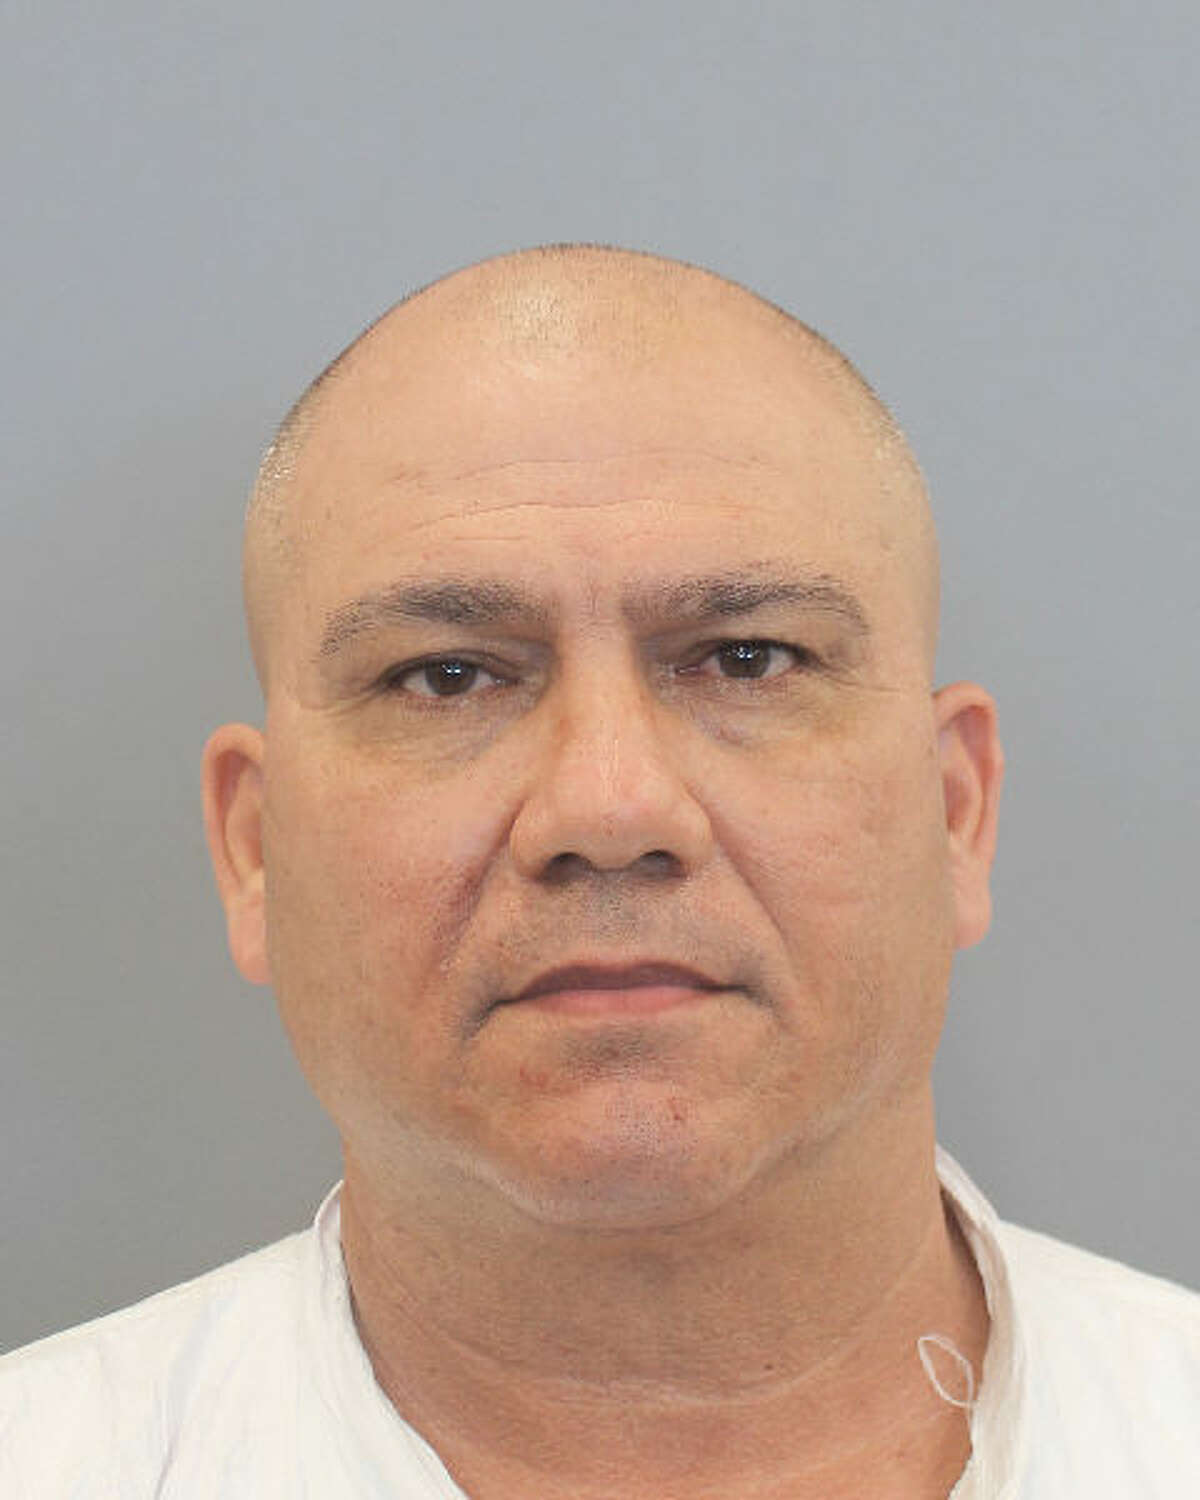 Francisco Leon Jimenez, 51, is charged with felony murder in the stabbing death of his wife Yennis Olga Llanes Garcia, 35, on March 23, 2022.